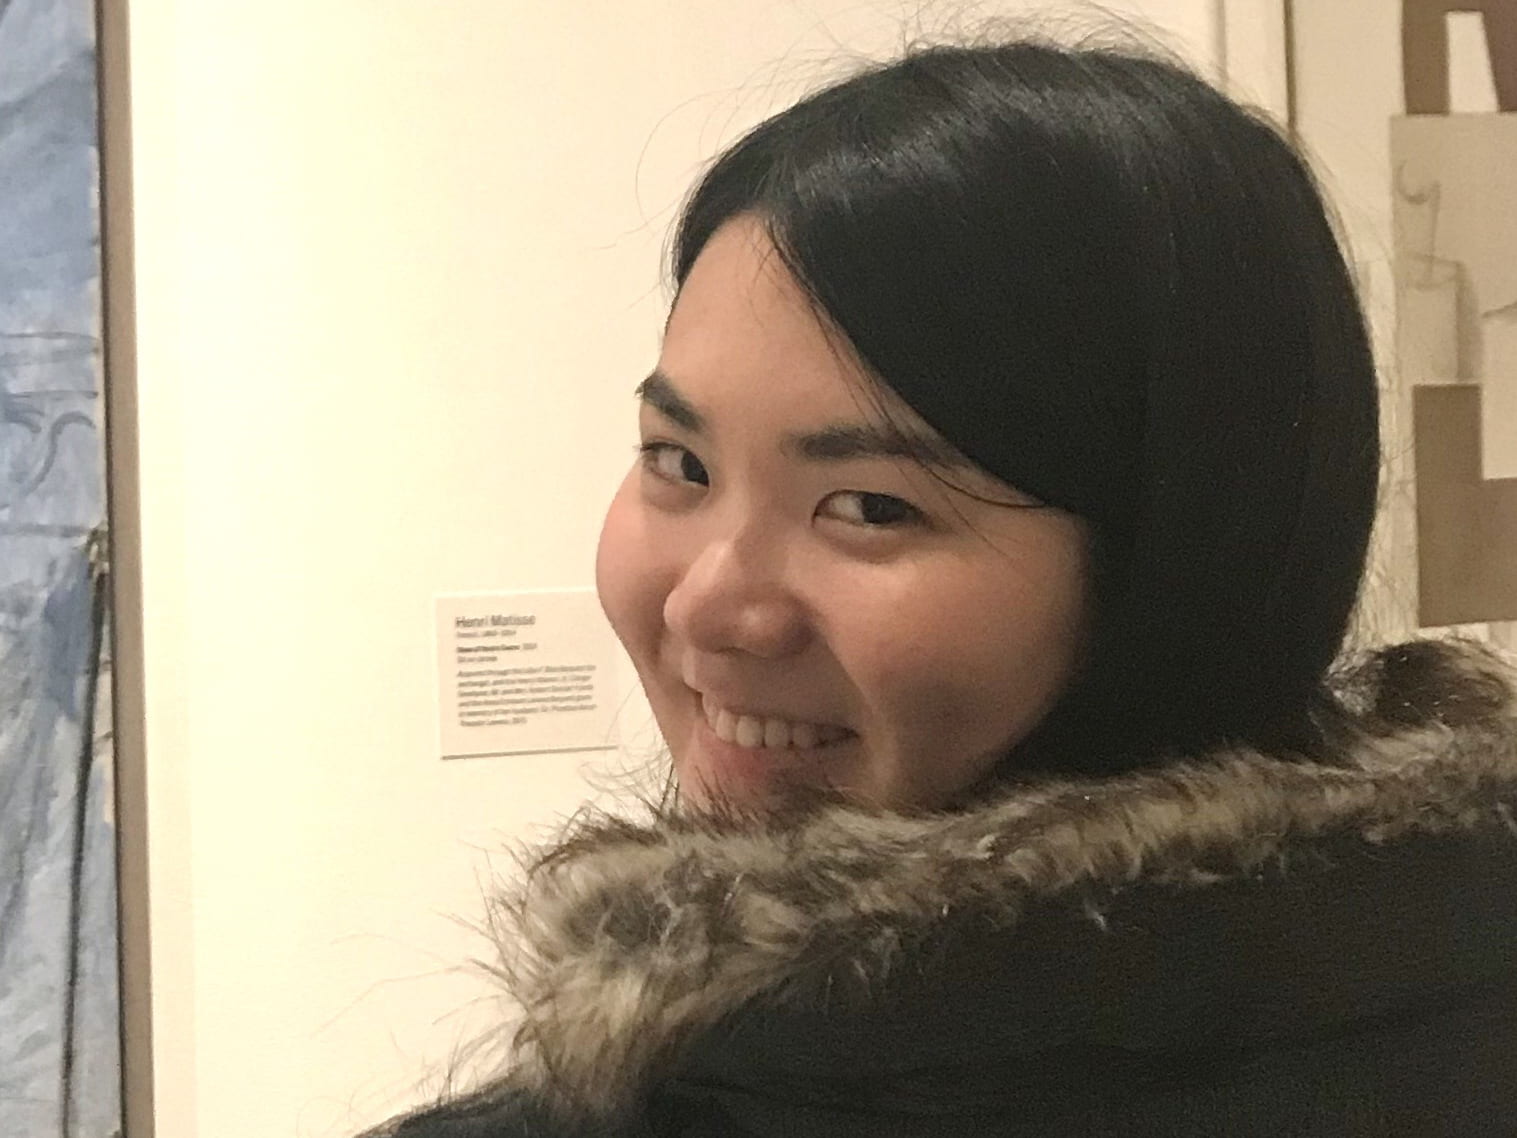 A photograph of Cornell ENgineering student Reina in front of a painting